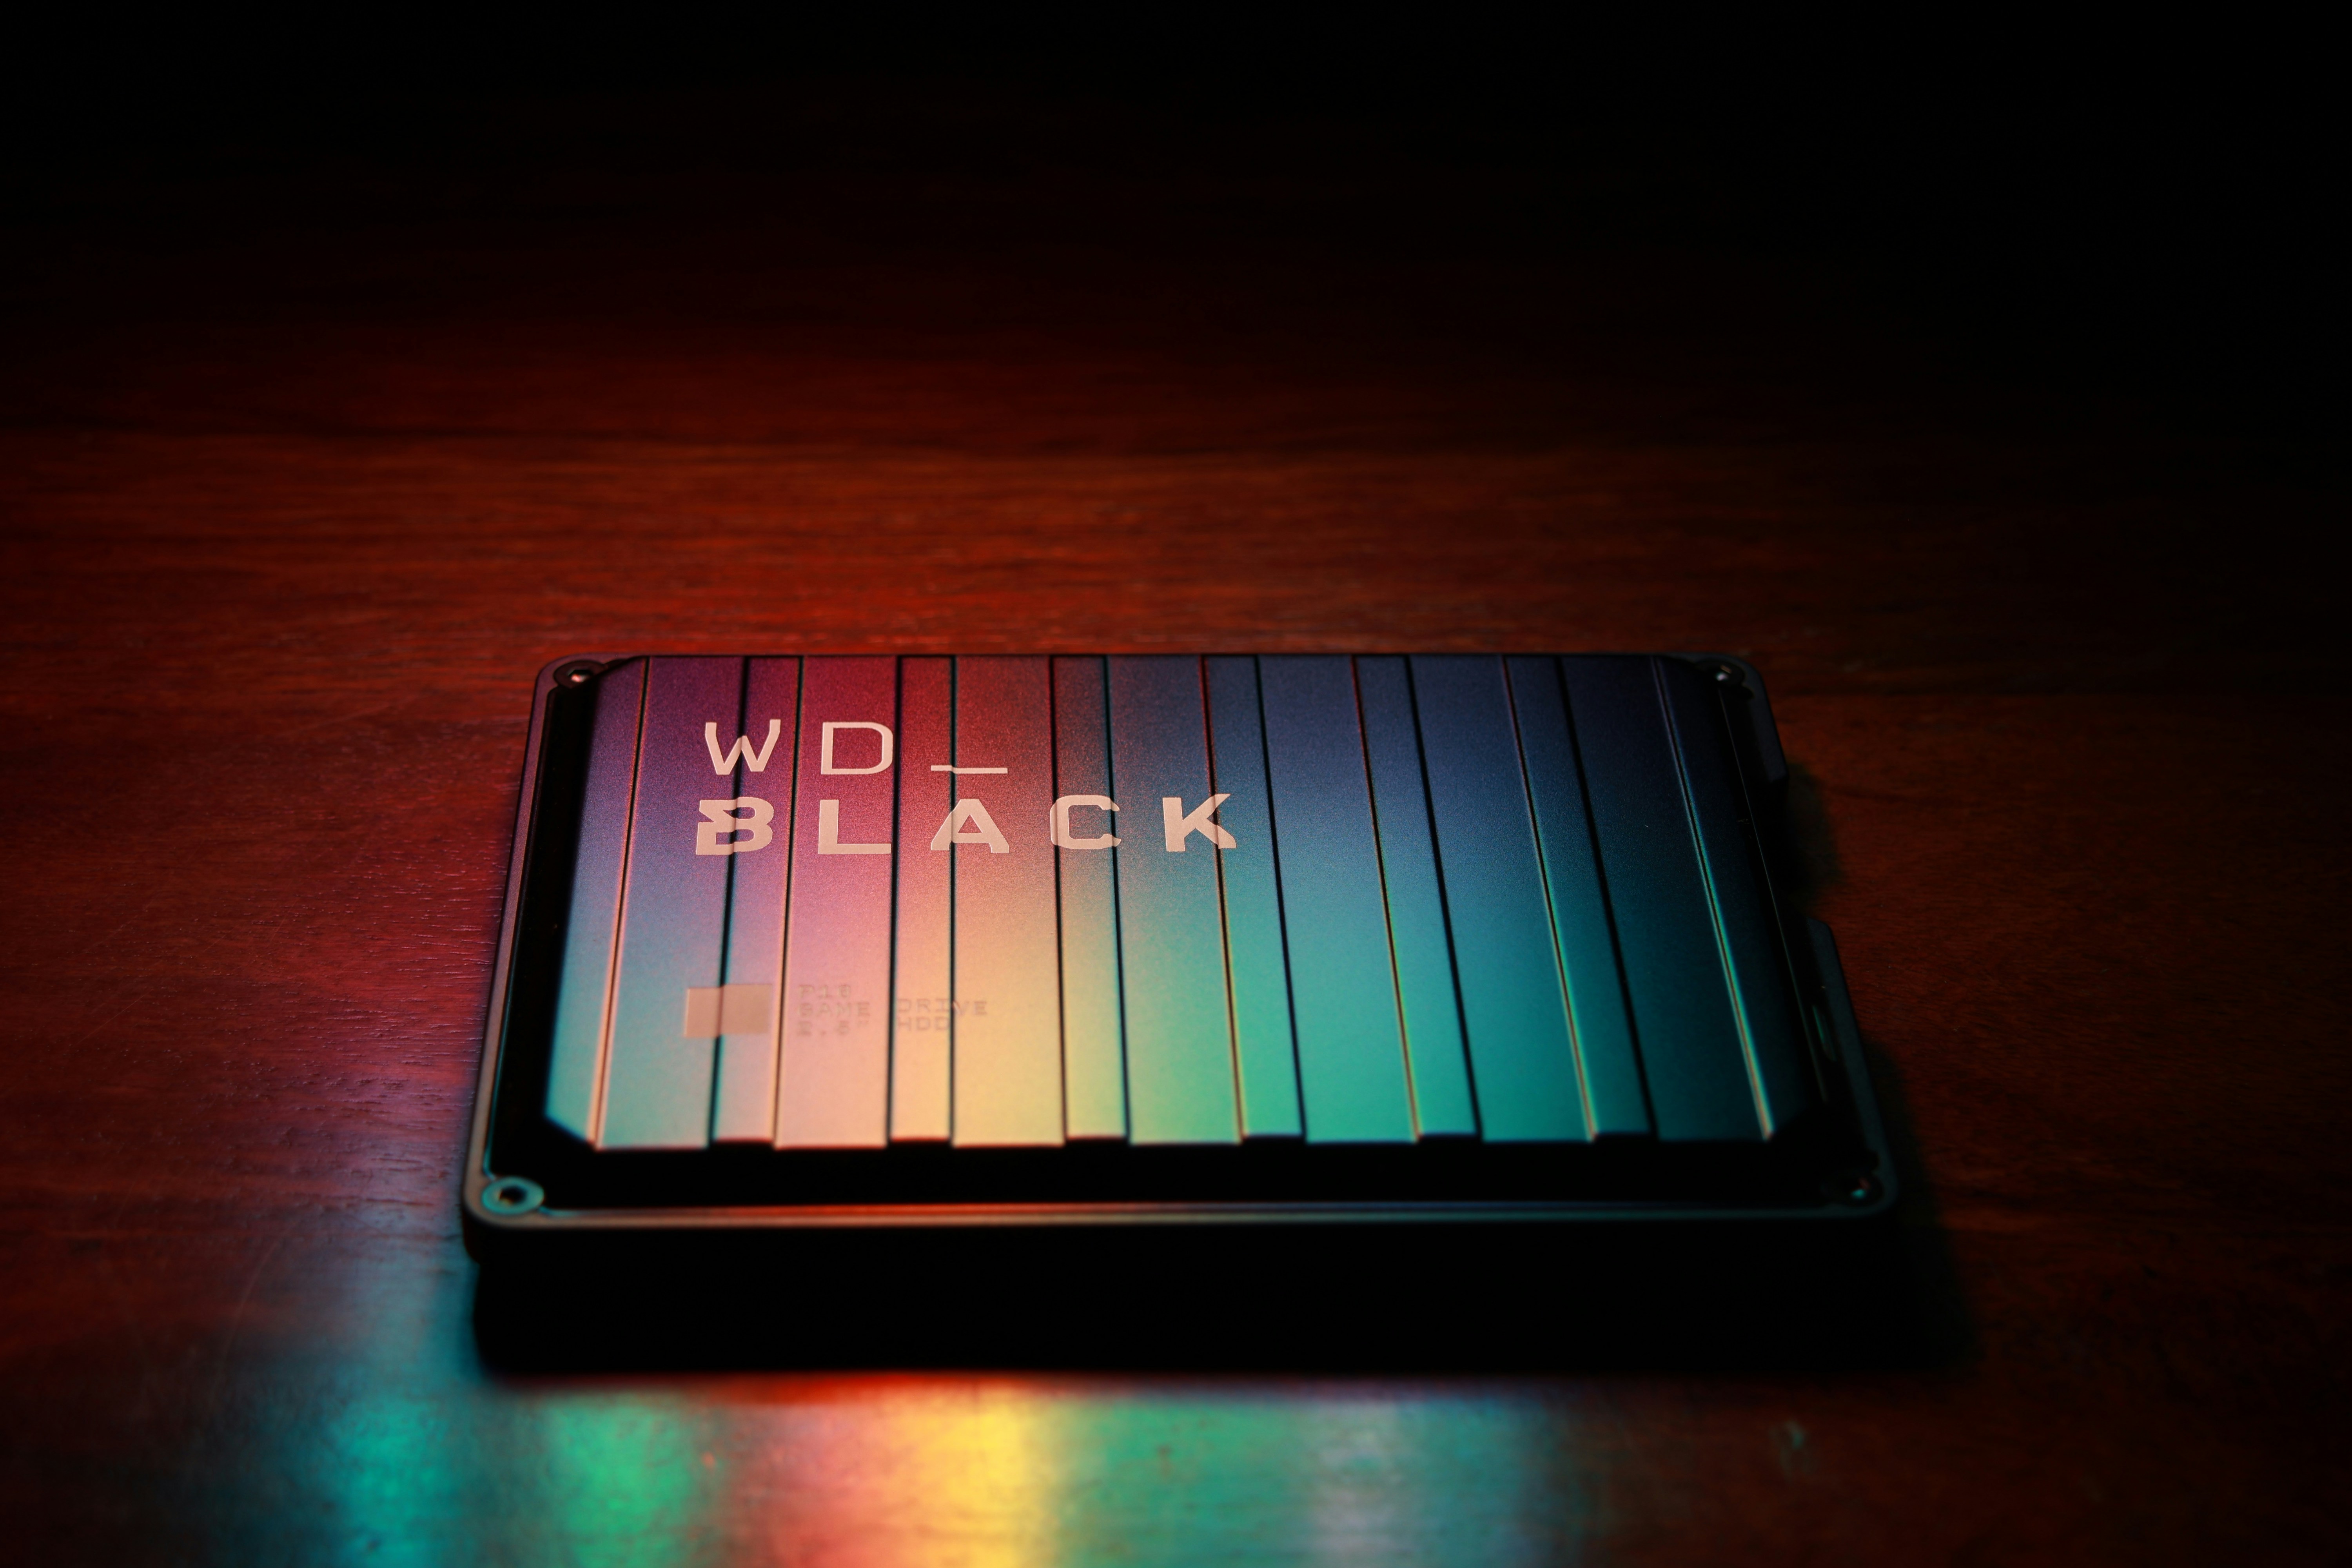 WD Black external USB hard disk in dark glowing with subtle colors